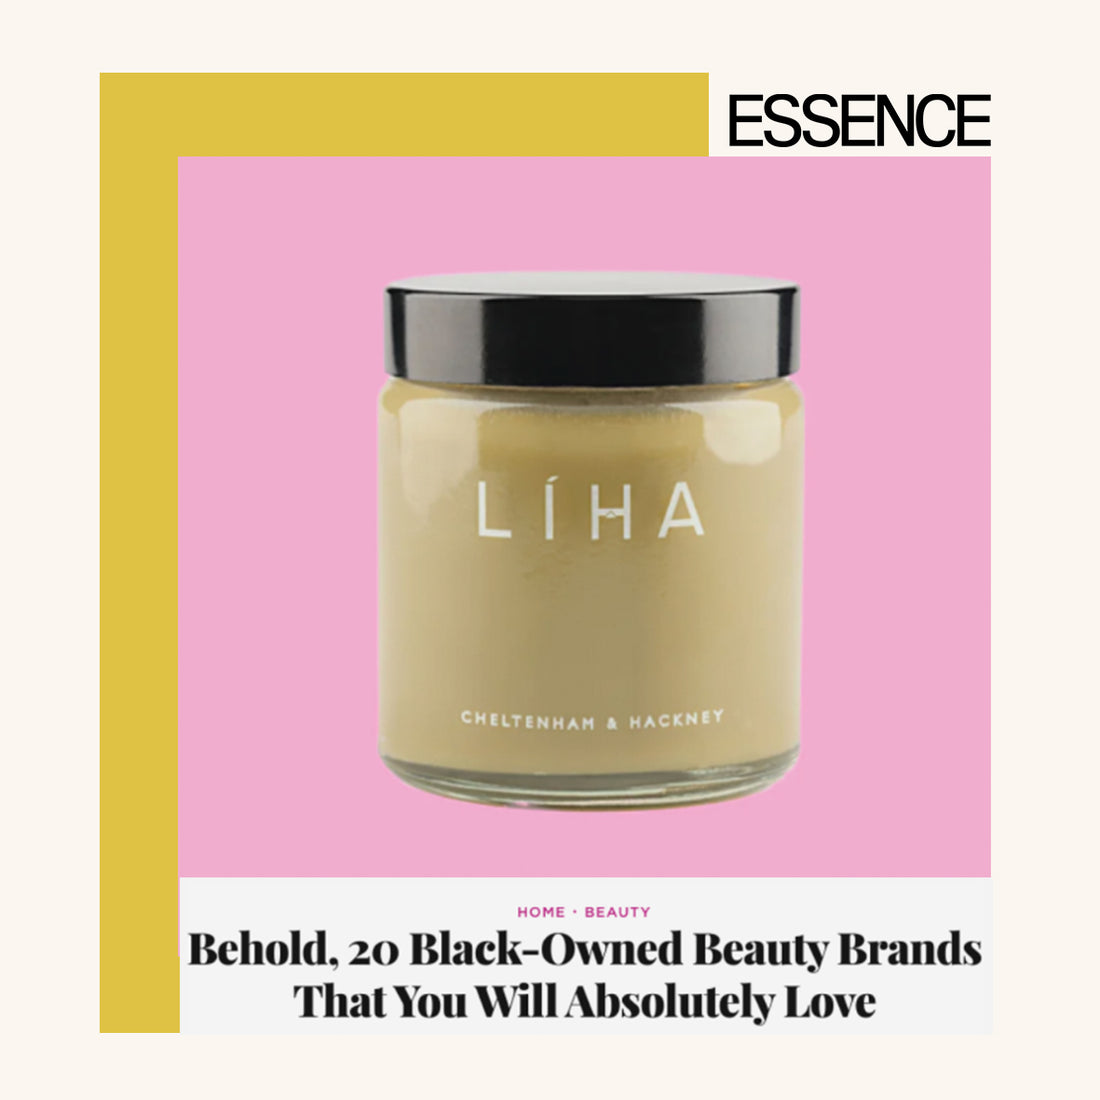 ESSENCE: Behold, 20 Black-Owned Beauty Brands That You Will Absolutely Love